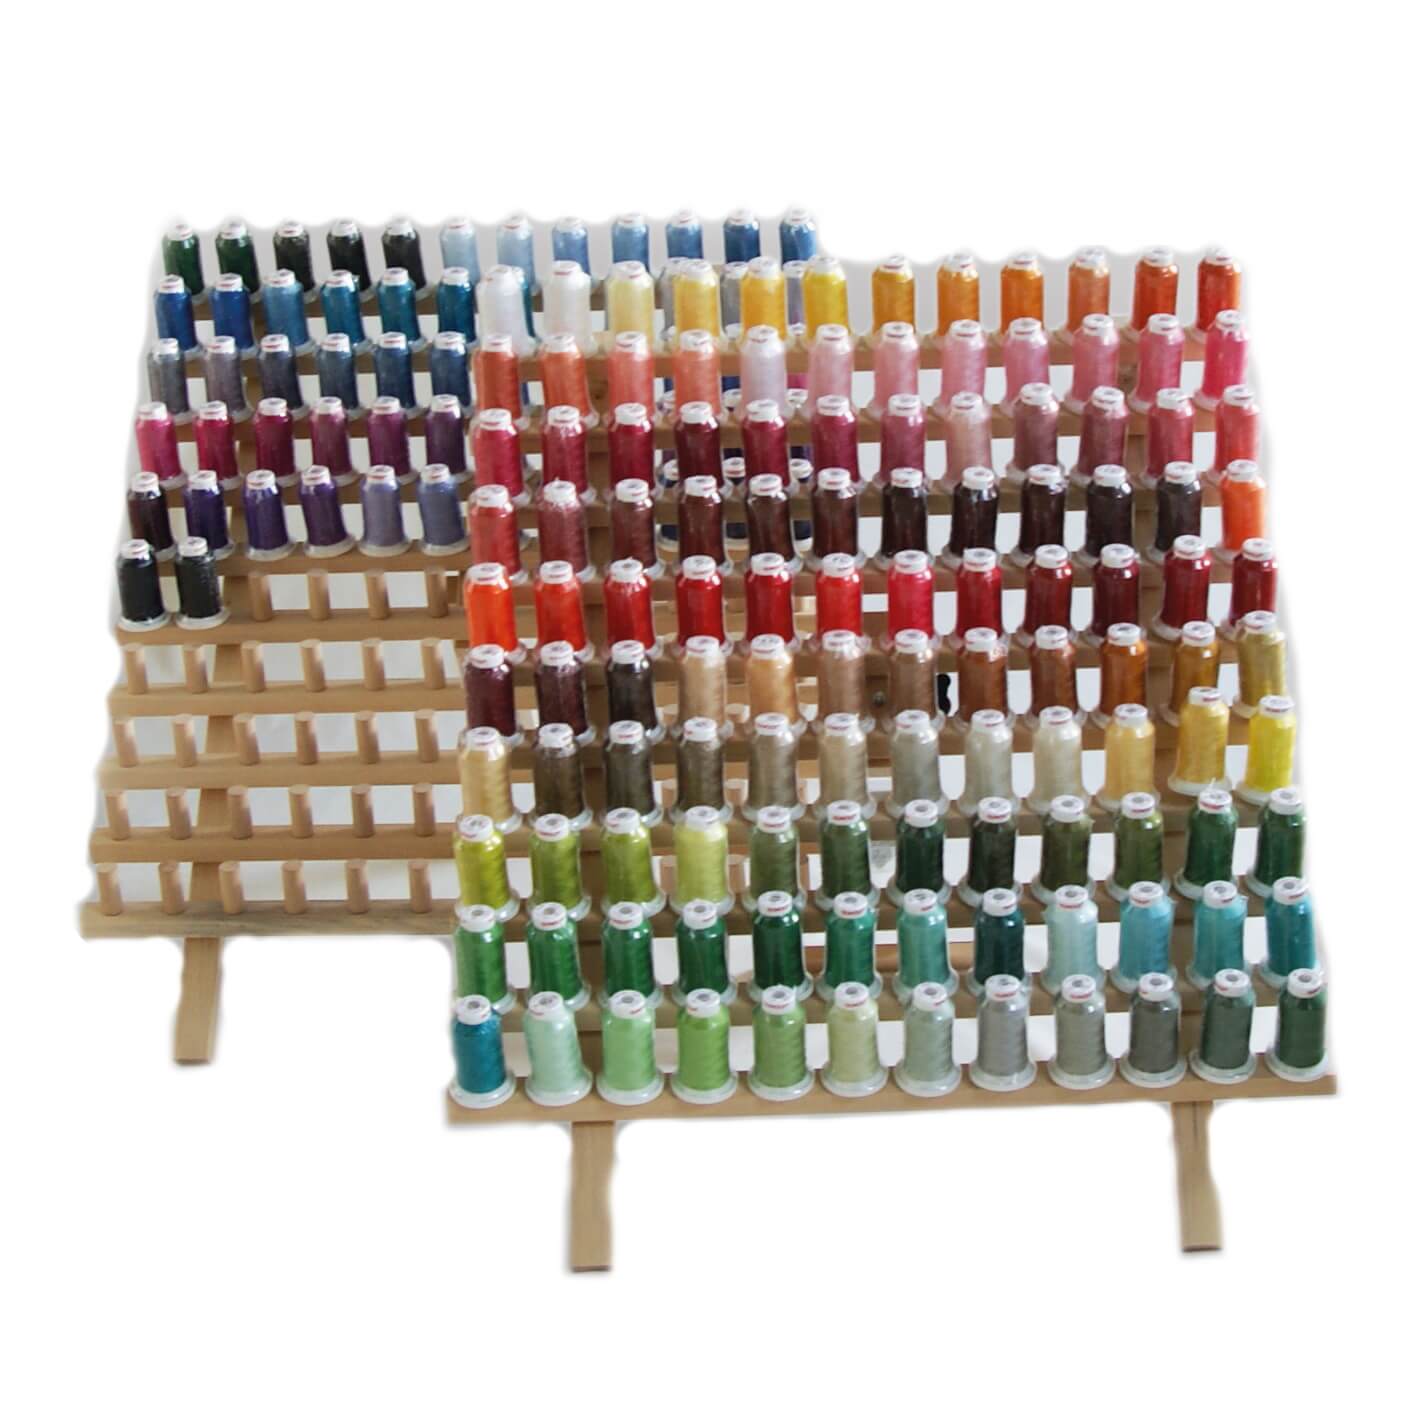 SULKY 40, Miniking of 1000 m, assortment of 335 solid colors + display